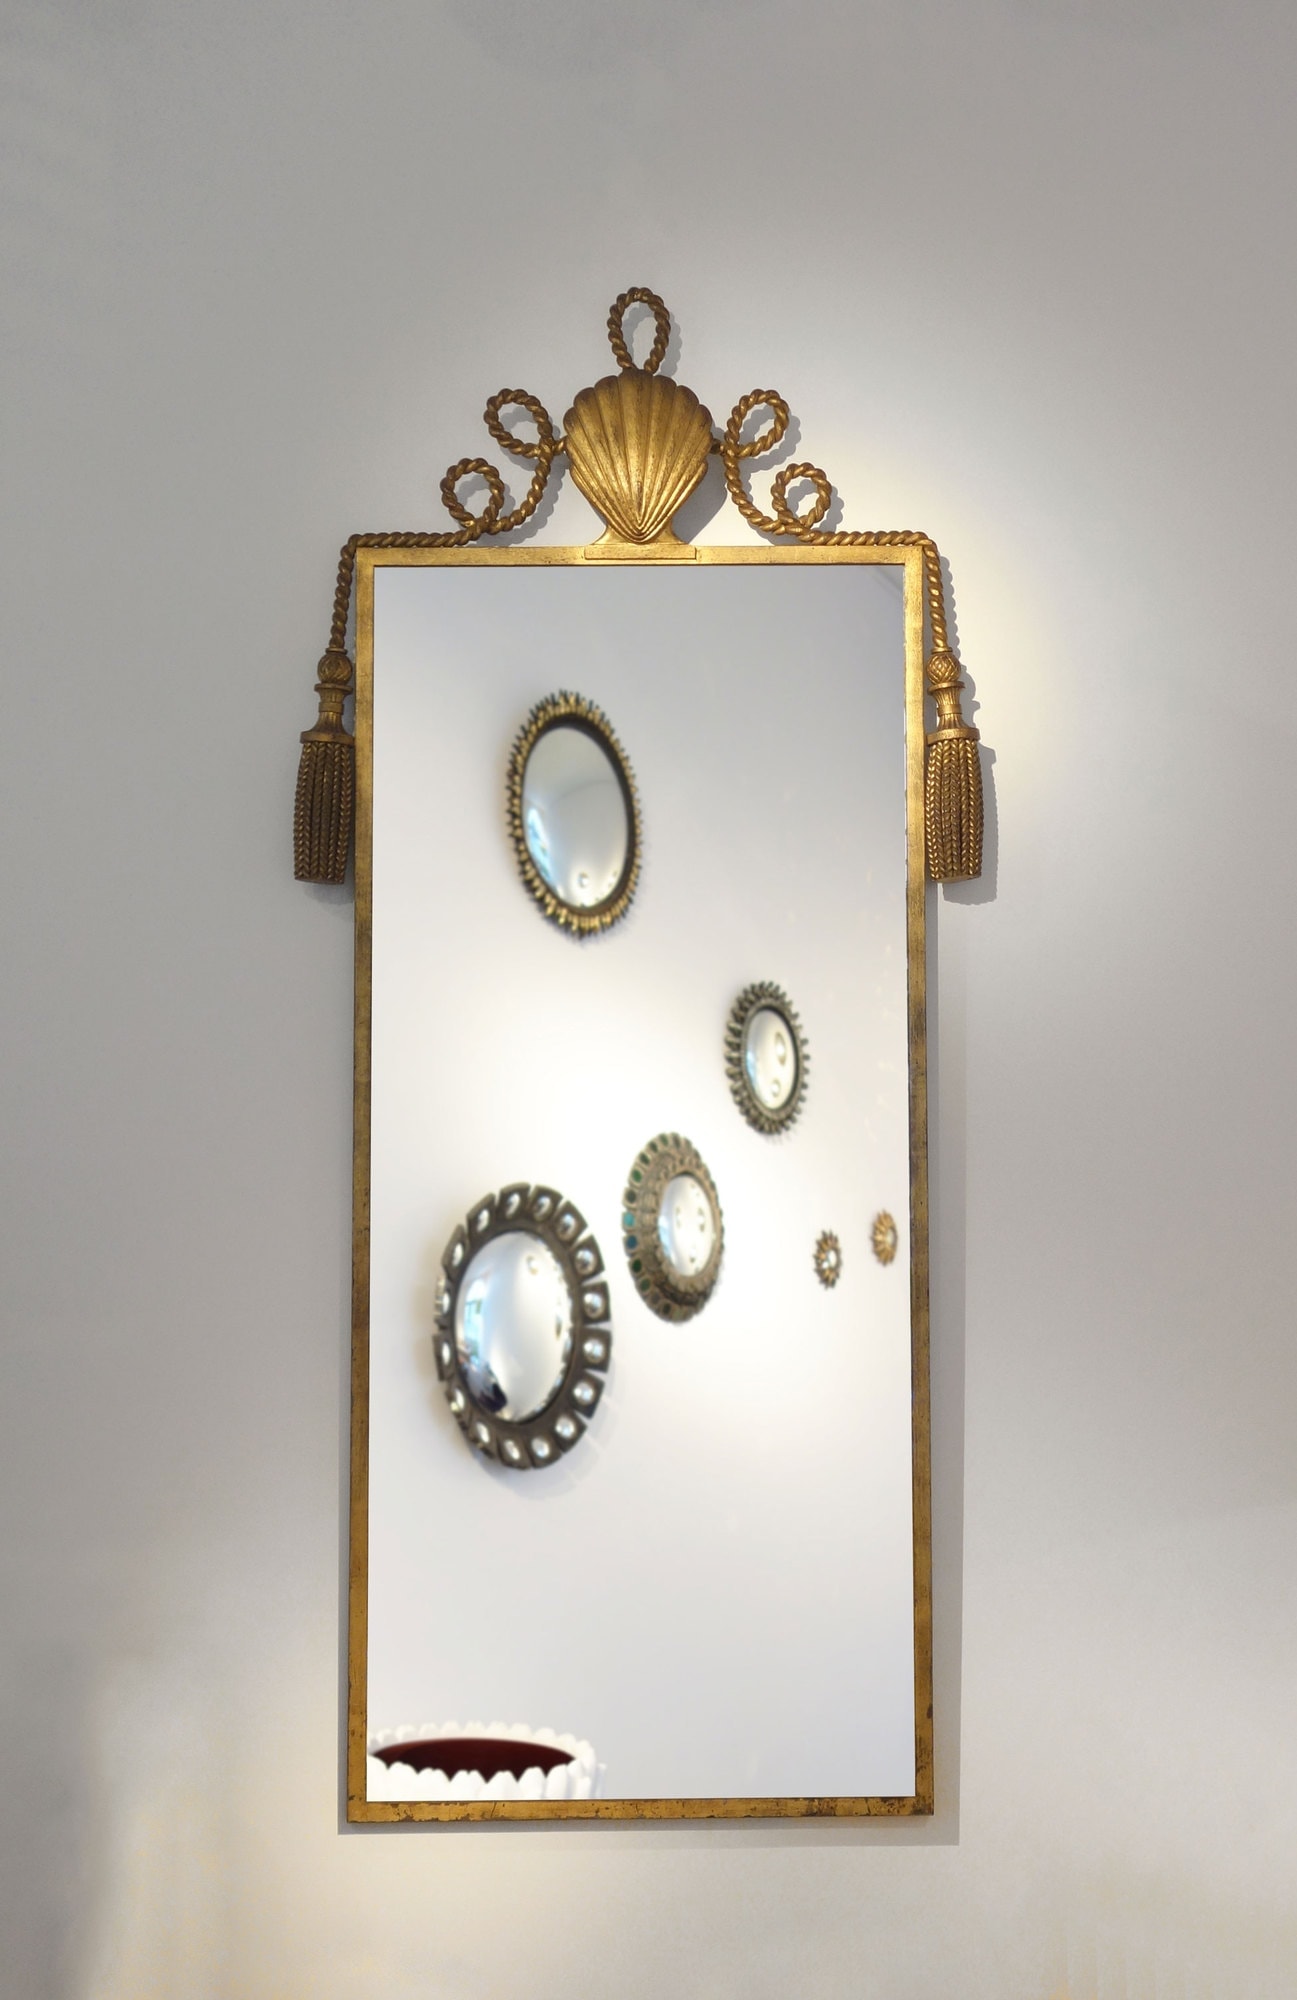 Gilbert Poillerat, Important and rare mirror (sold), vue 01